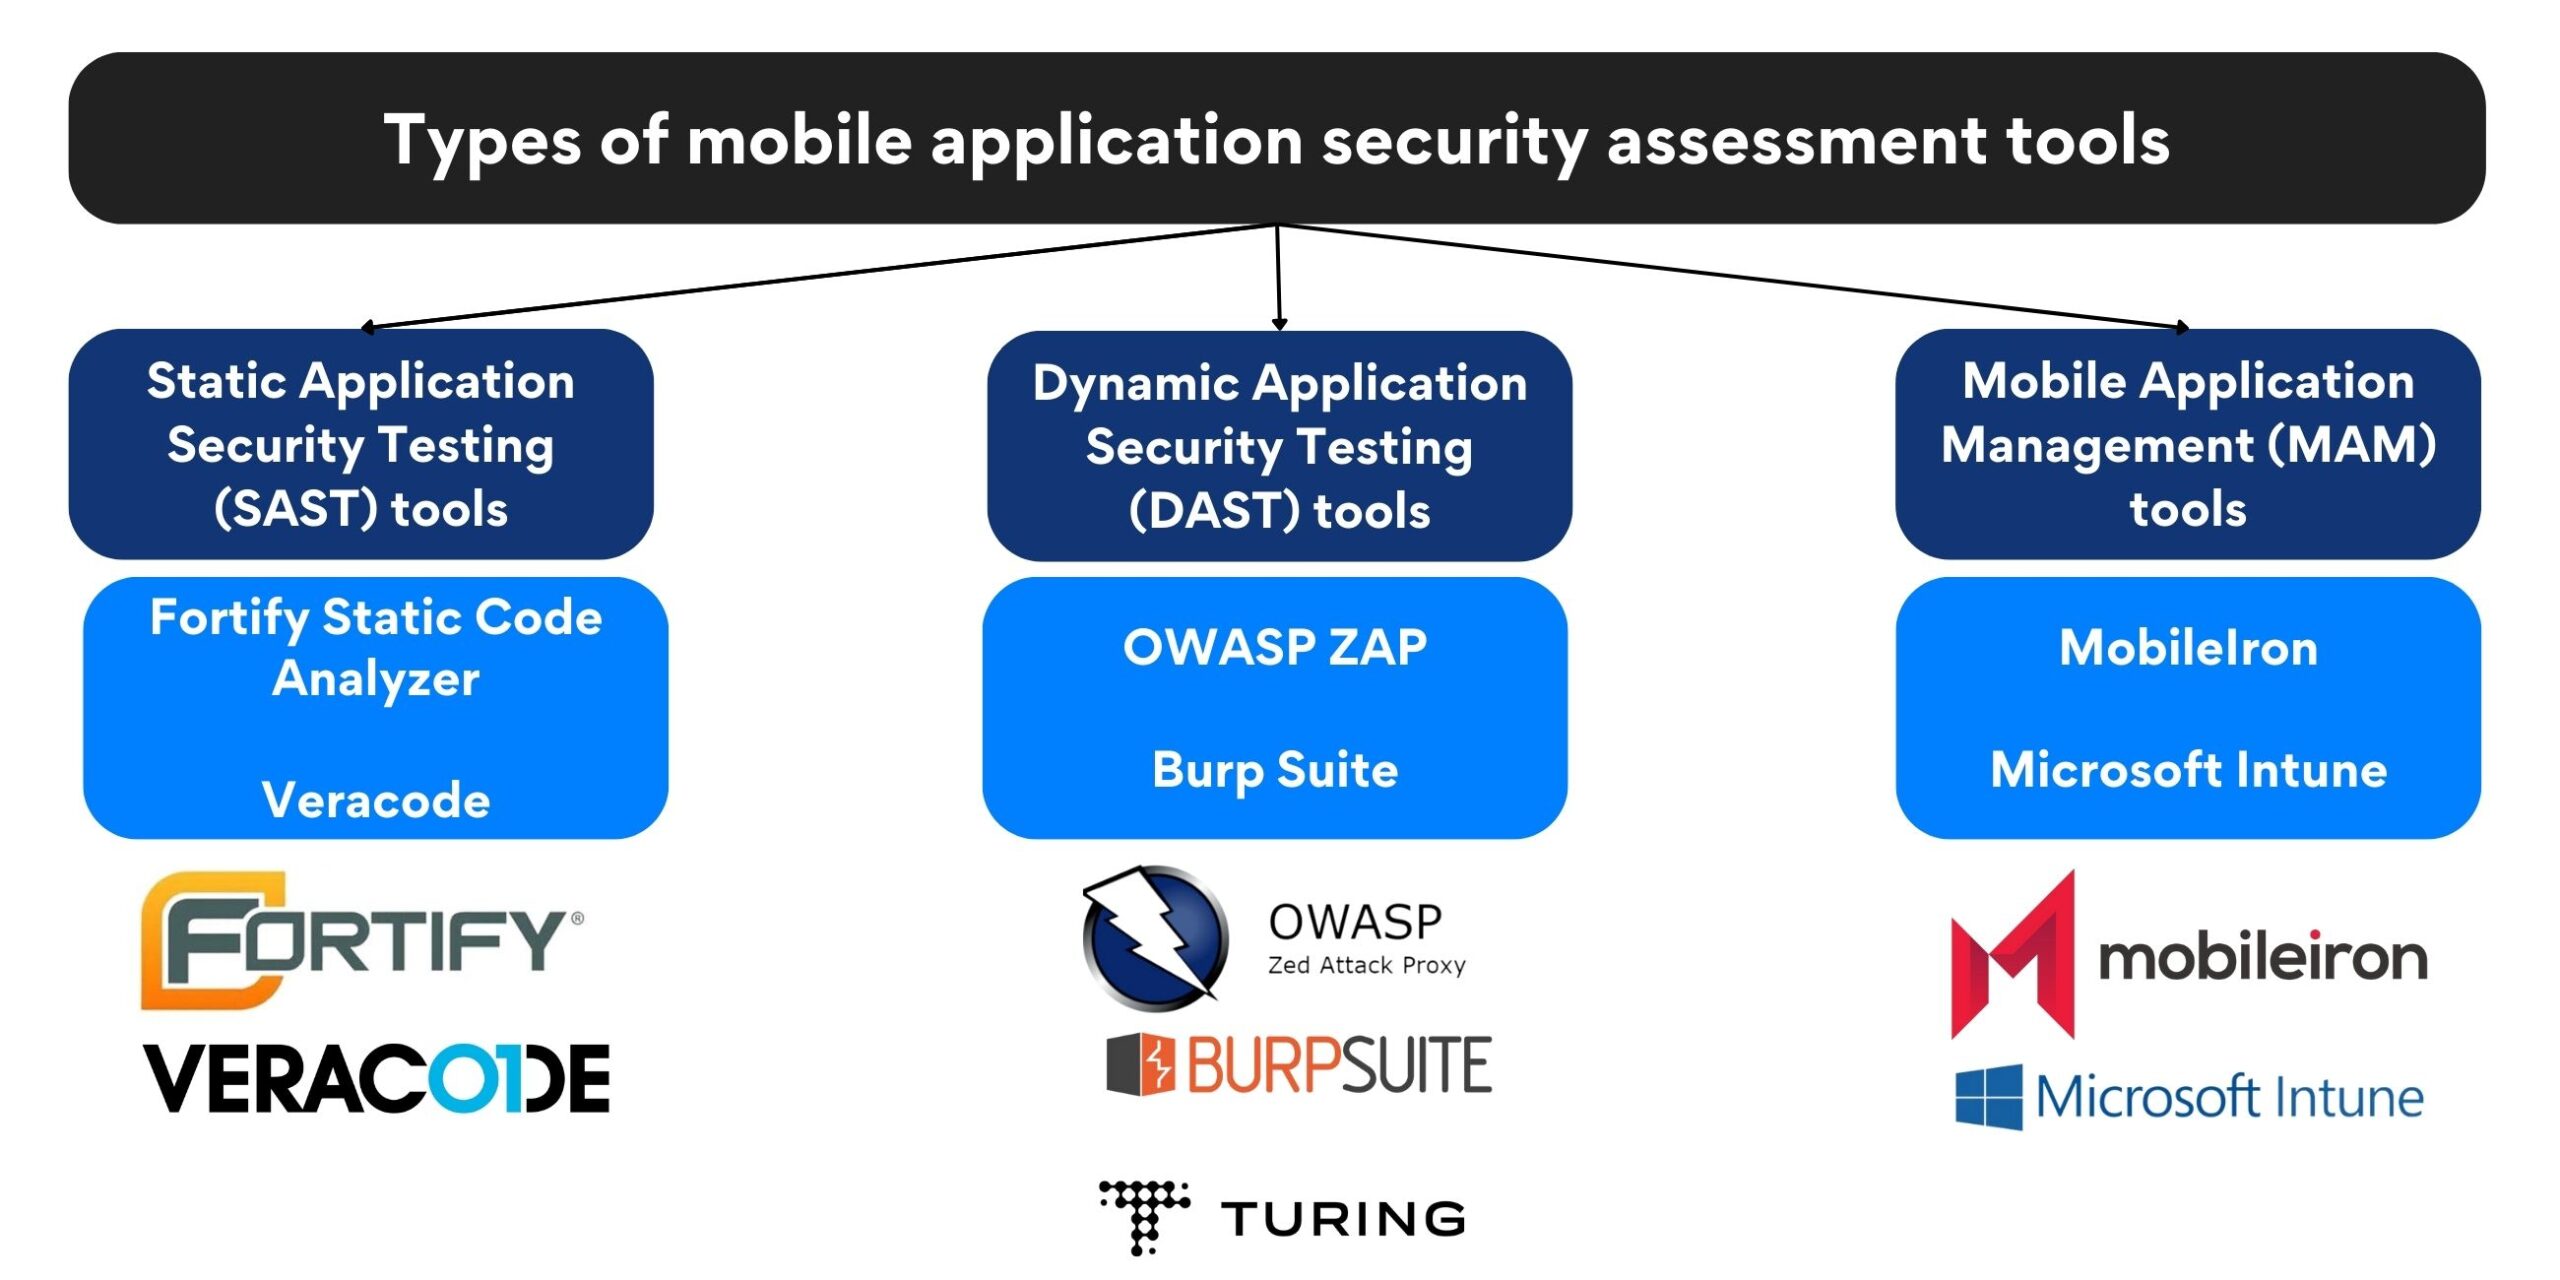 Types of mobile application security assessment tools